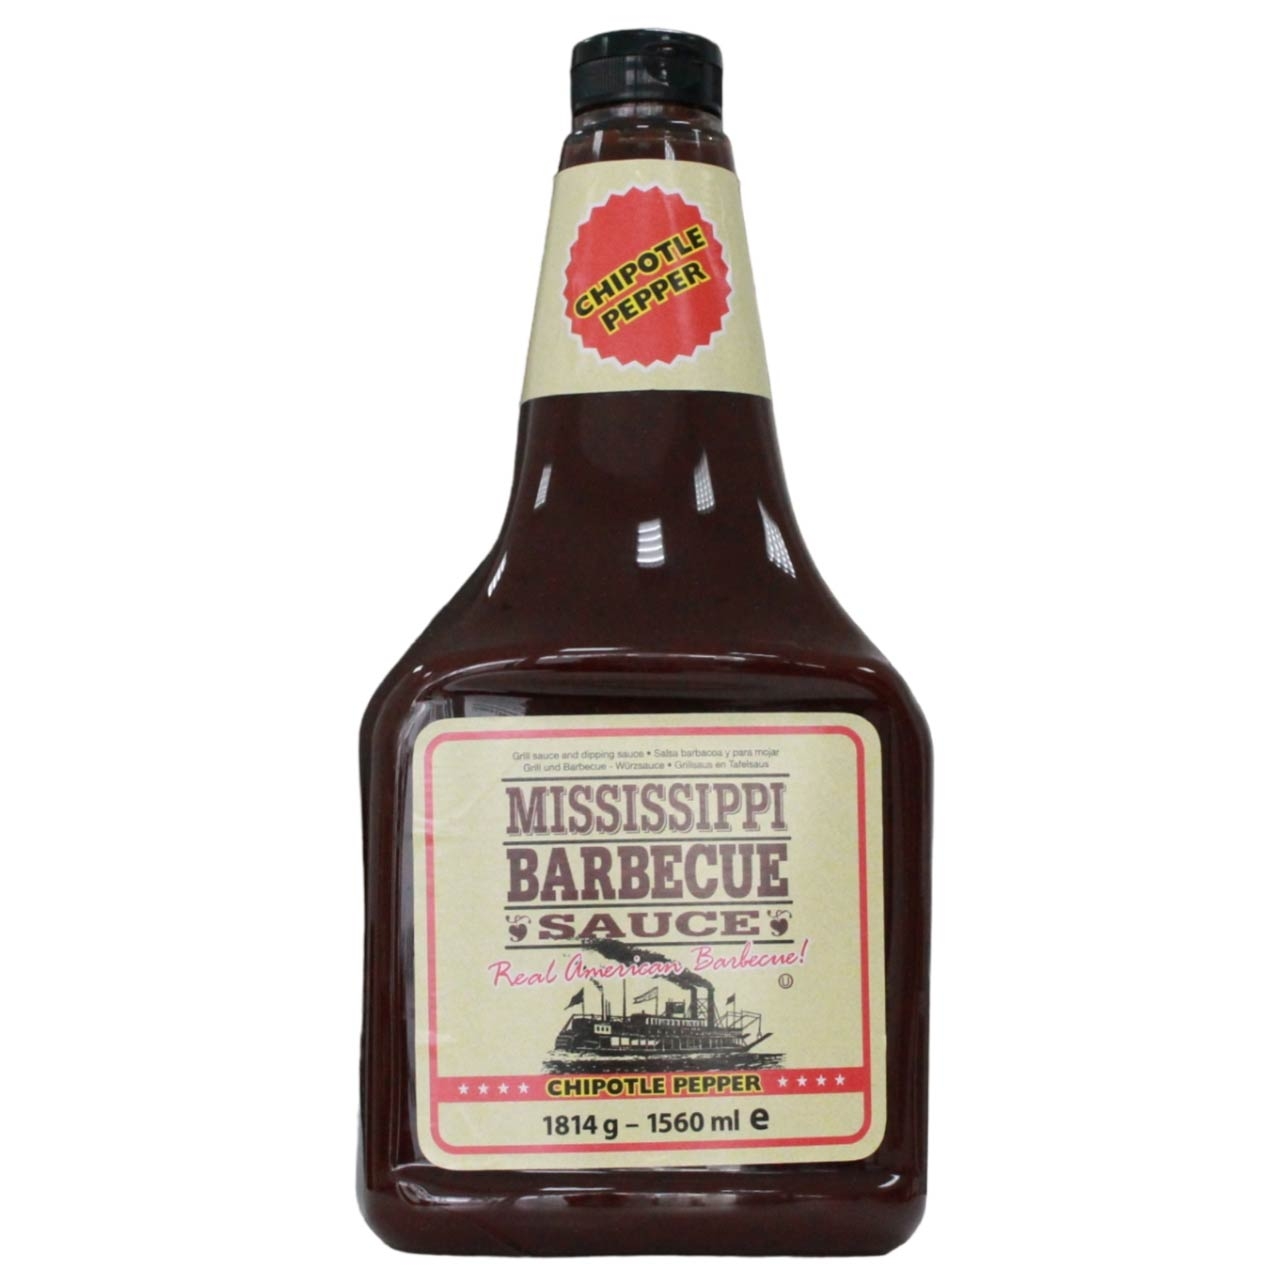 Mississippi Barbecue Sauce Chipotle Pepper 1560 ml